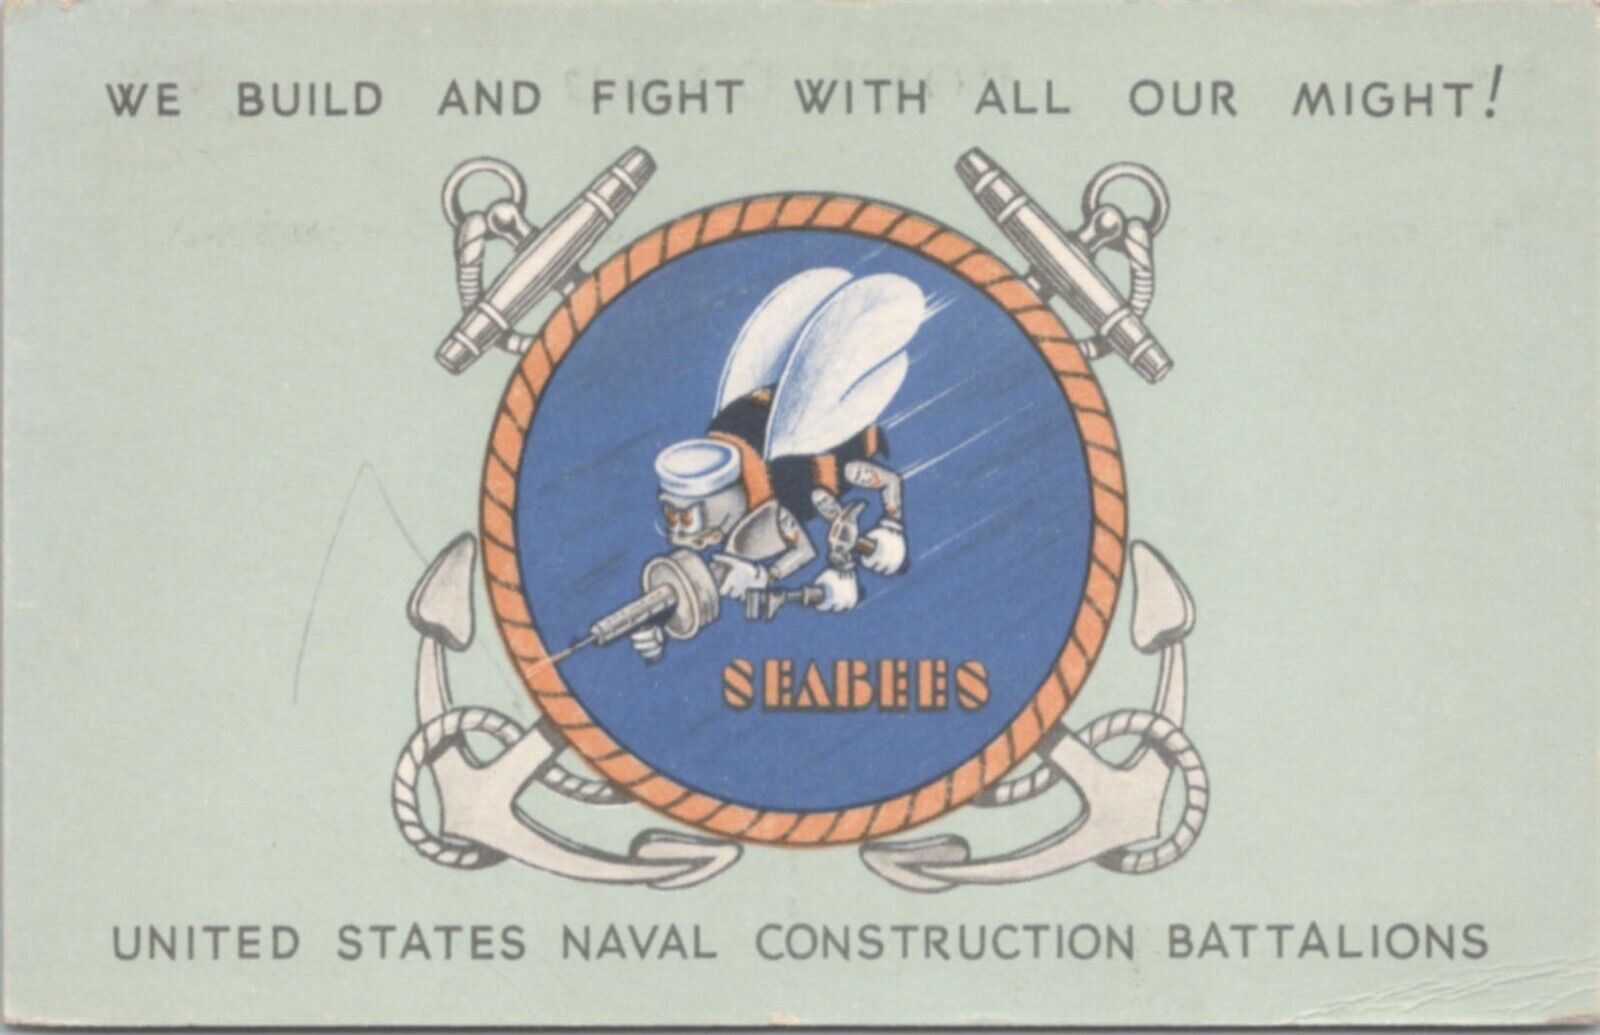 US Navy SeaBees Construction Battalions-We Build & Fight w/all our might 1943